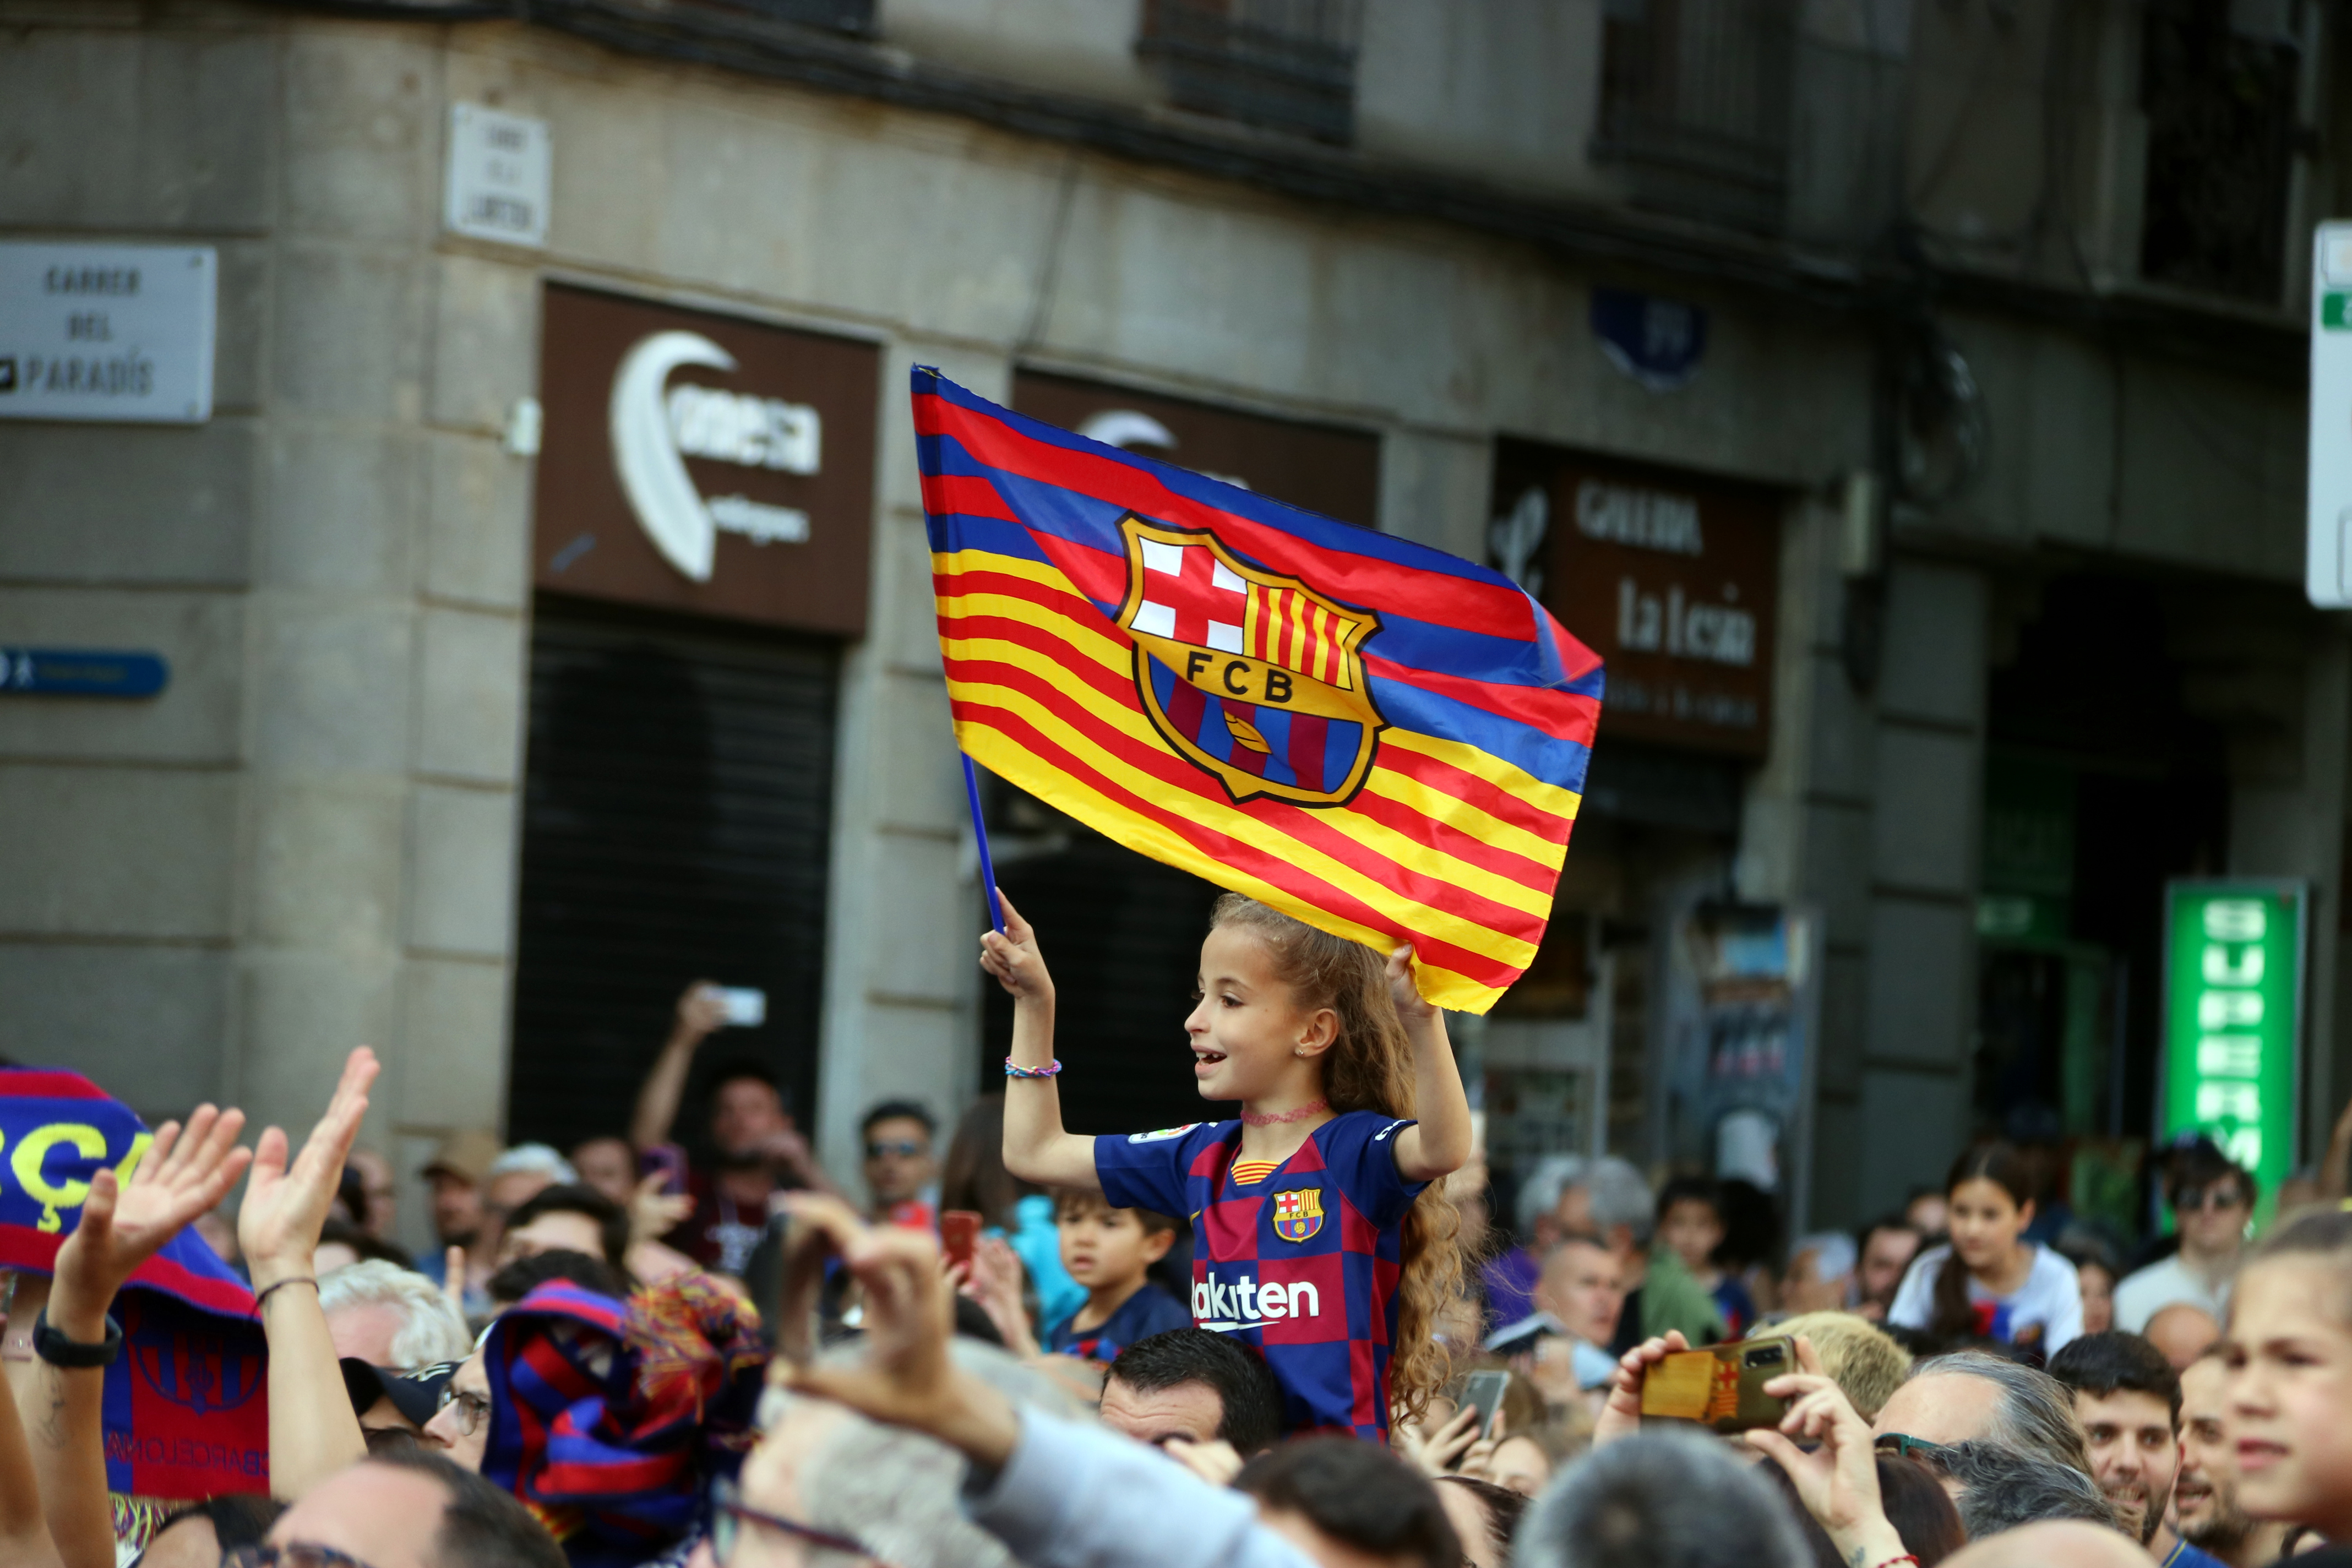 A little girl celebrates at the Plaça Sant Jaume in Barcelona on June 4, 2023 the Champions League trophy the FC Barcelona Women's team won in Eindhoven